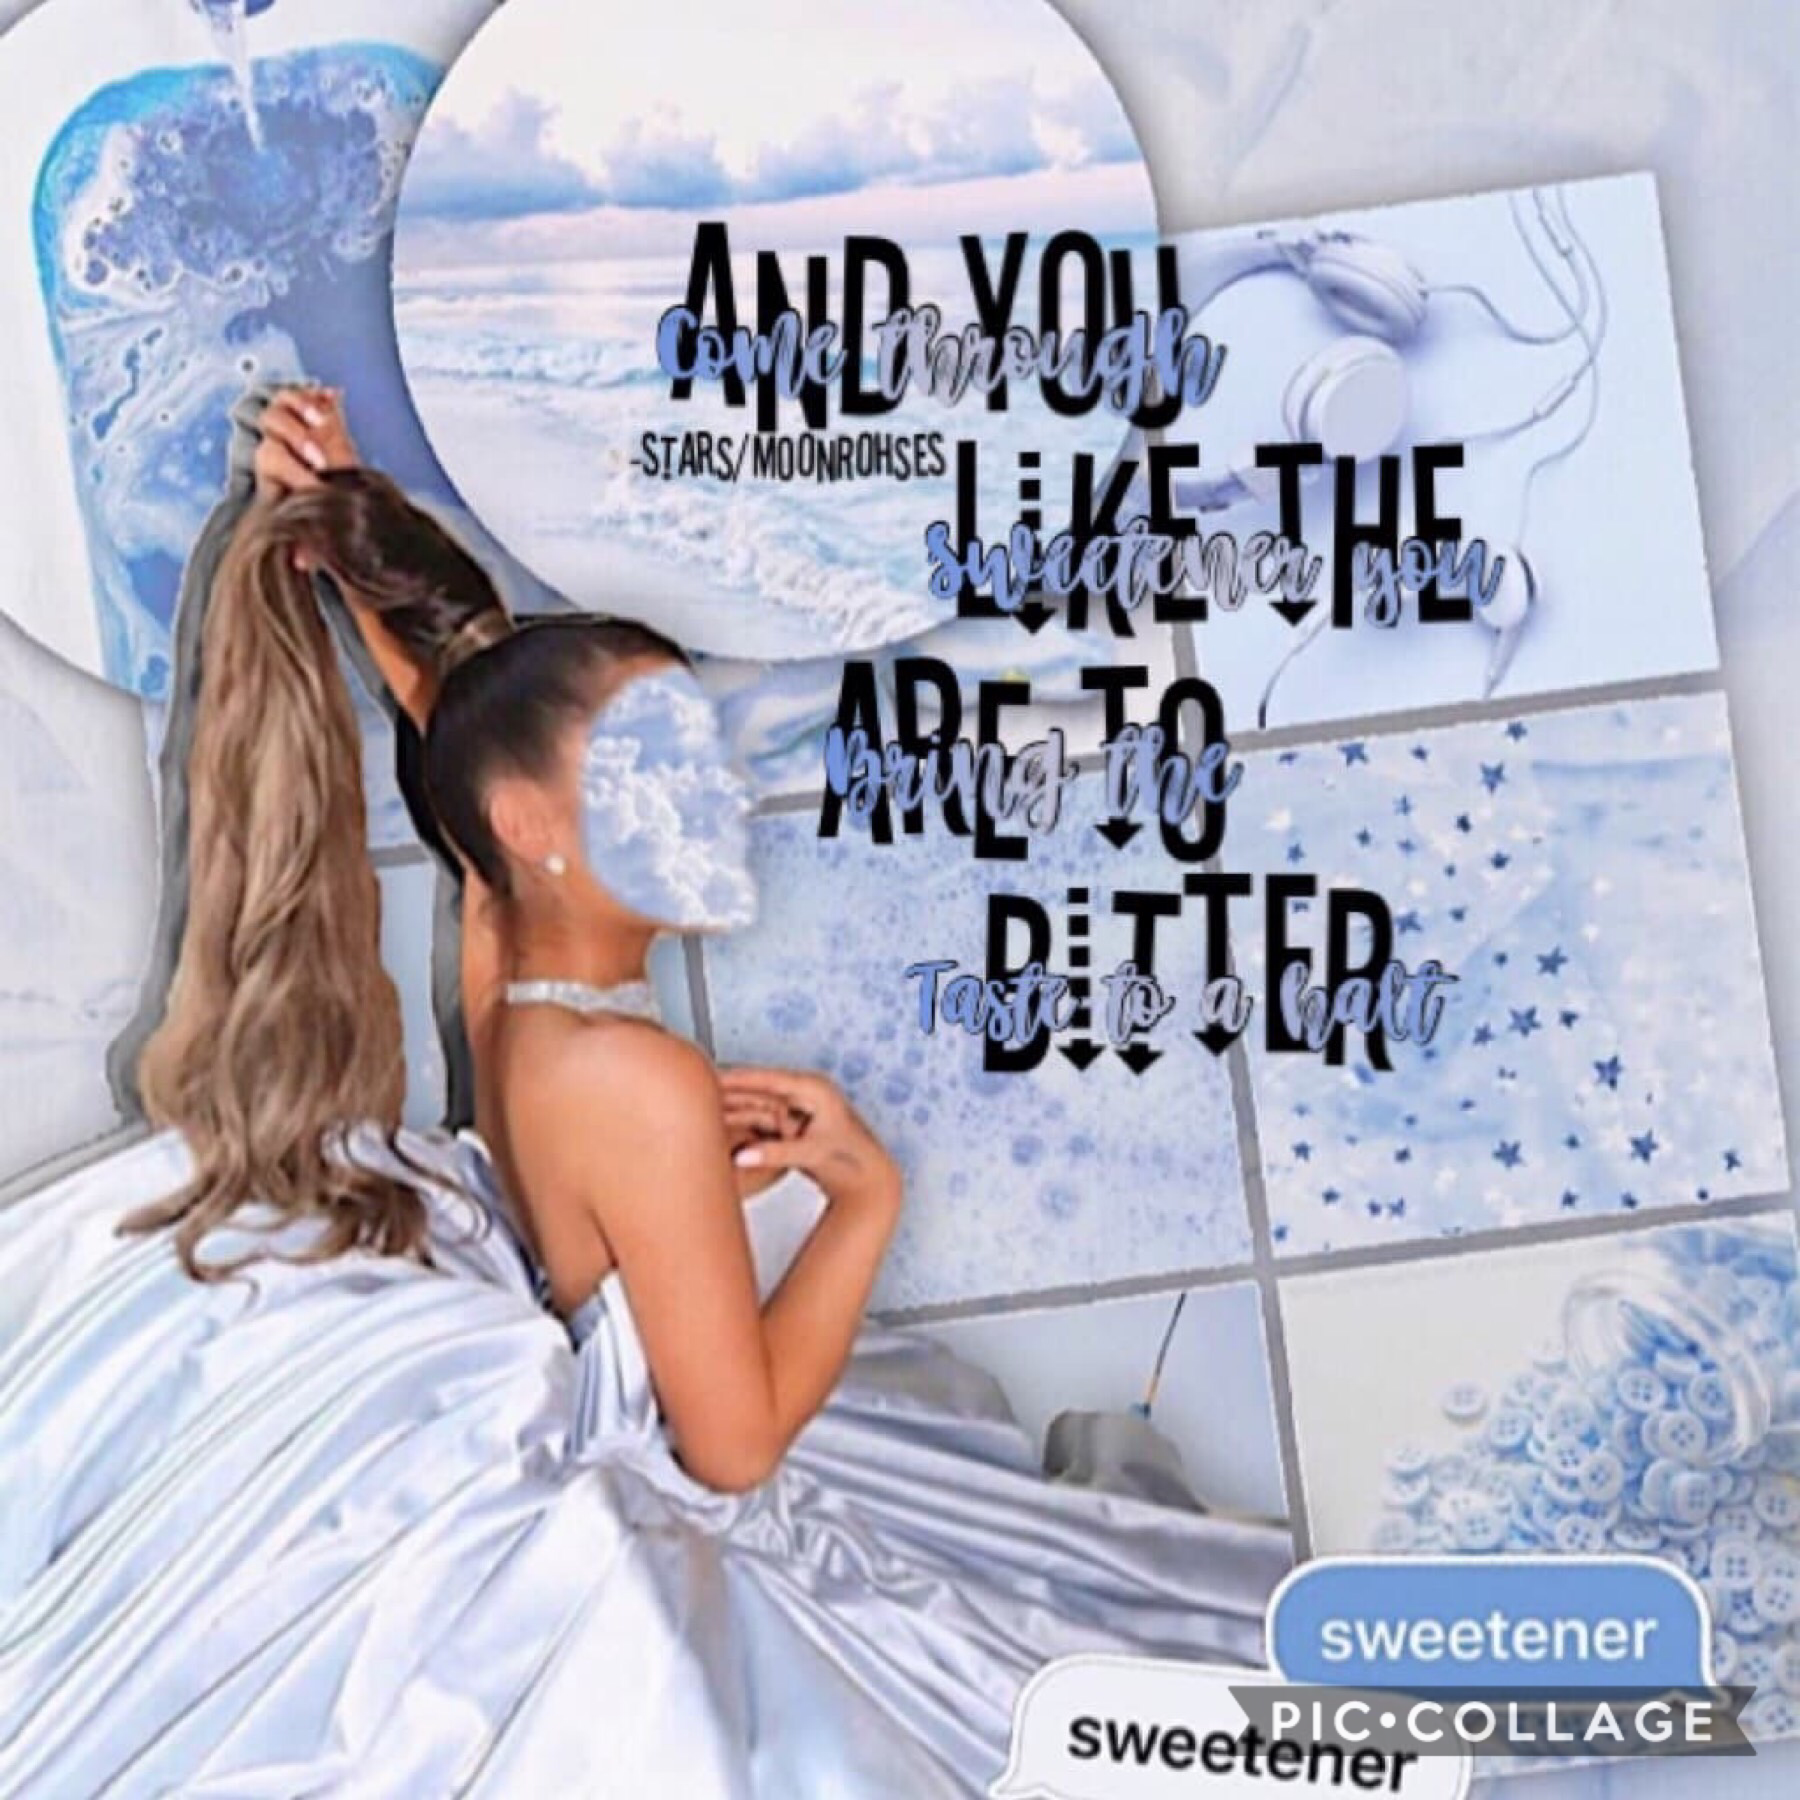 💙 t a p 💙

Collab with the amazing -stars !!
She did the lovely text and I did the background

Remember to go follow her and check out her other collages! They’re all so wonderful✨